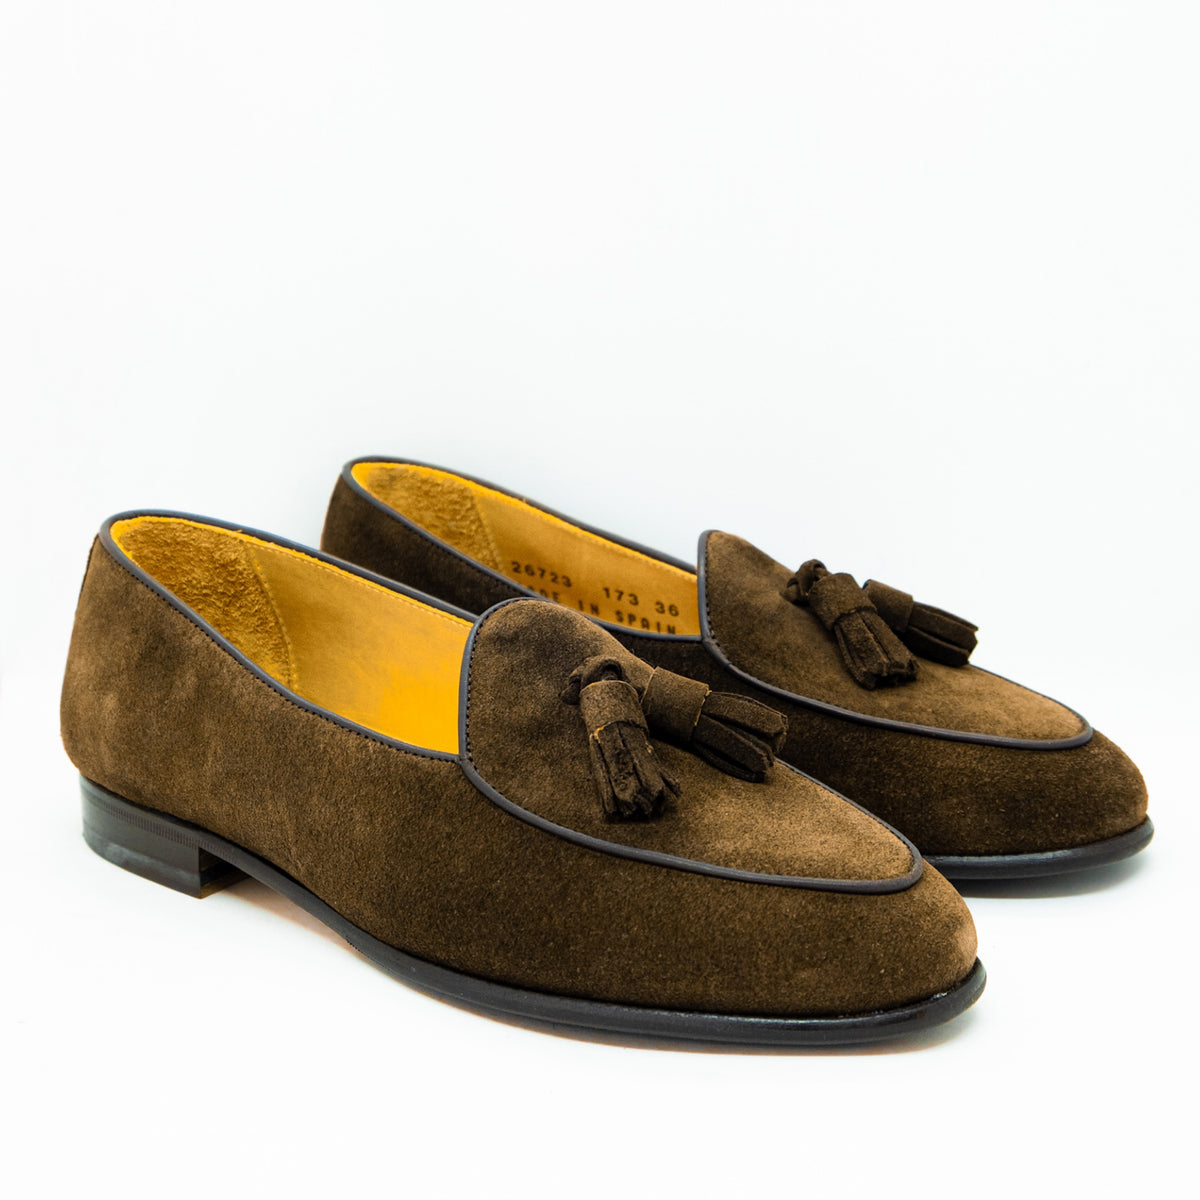 Sardinelli Prontofino Brown Suede Penny Loafers